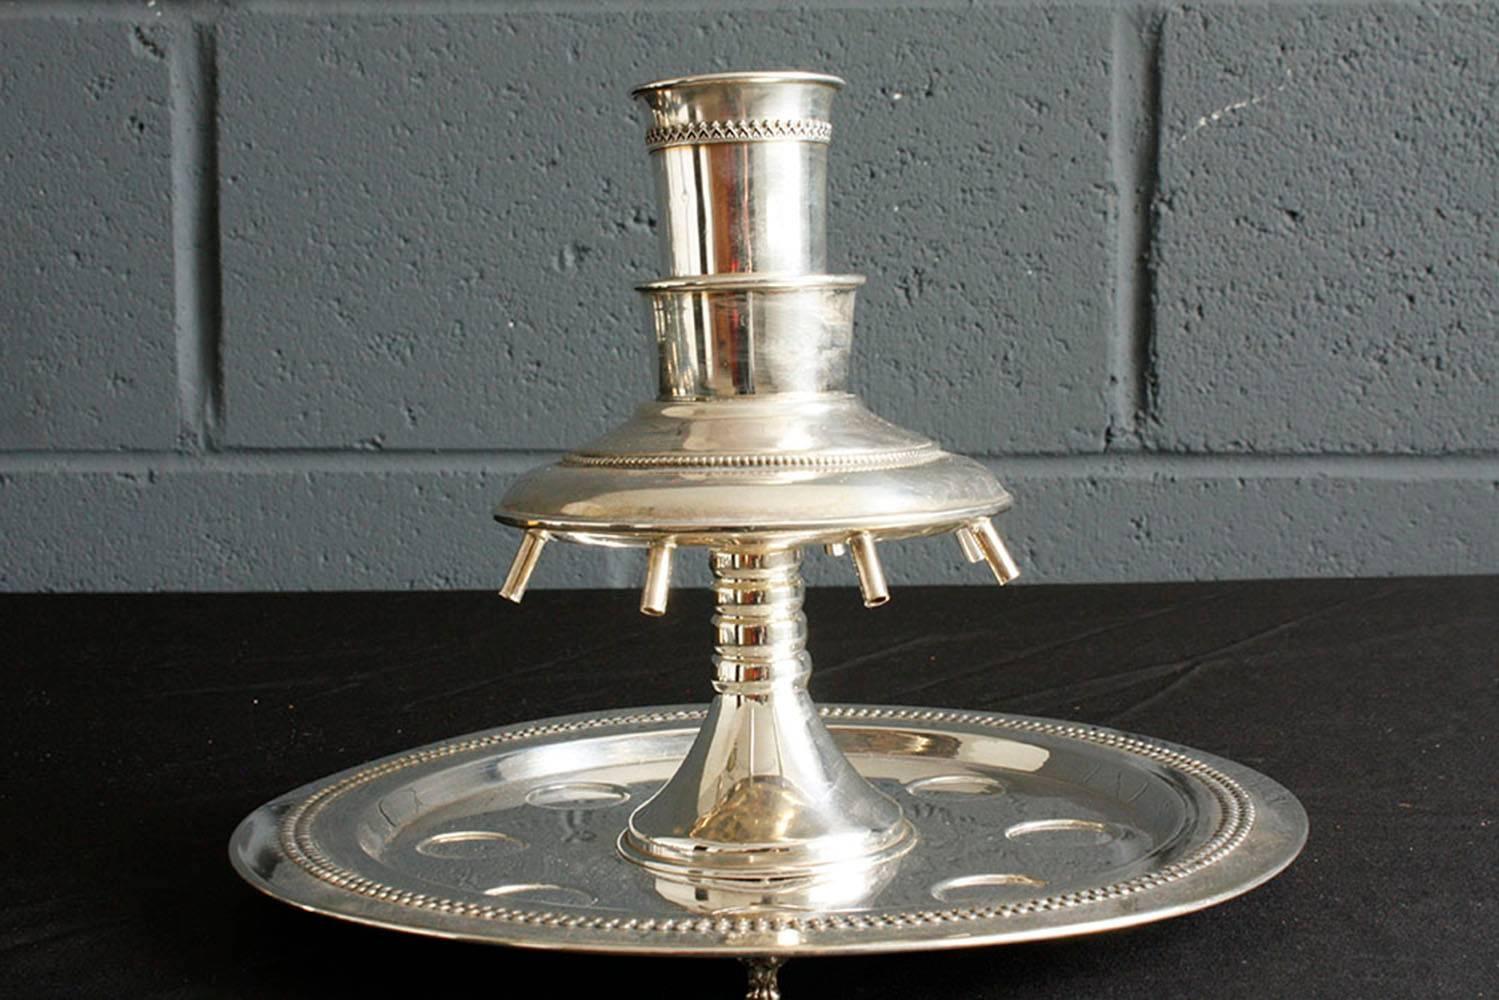 This 1950s Judaica-style wine fountain is made of sterling silver. The set includes the wine fountain base, a larger waterfall cup, and eight drinking cups. The set is stamped .925 sterling silver. The wine fountain would made a great hosting piece